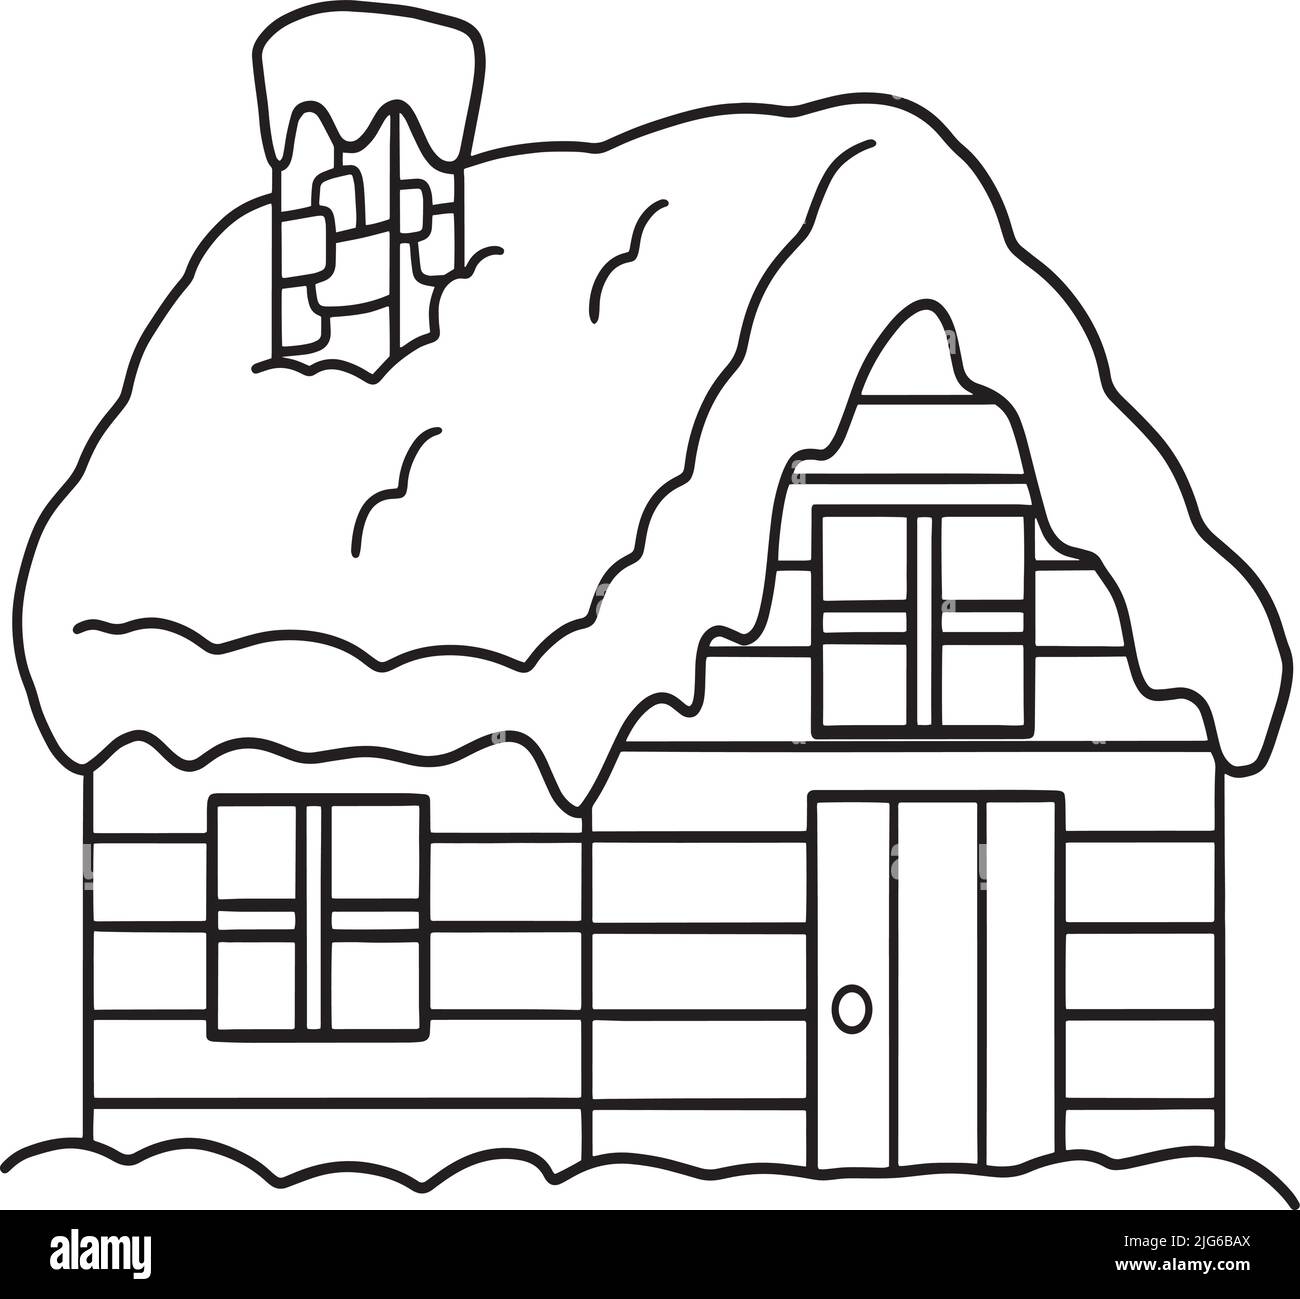 Winter House Isolated Coloring Page for Kids Stock Vector